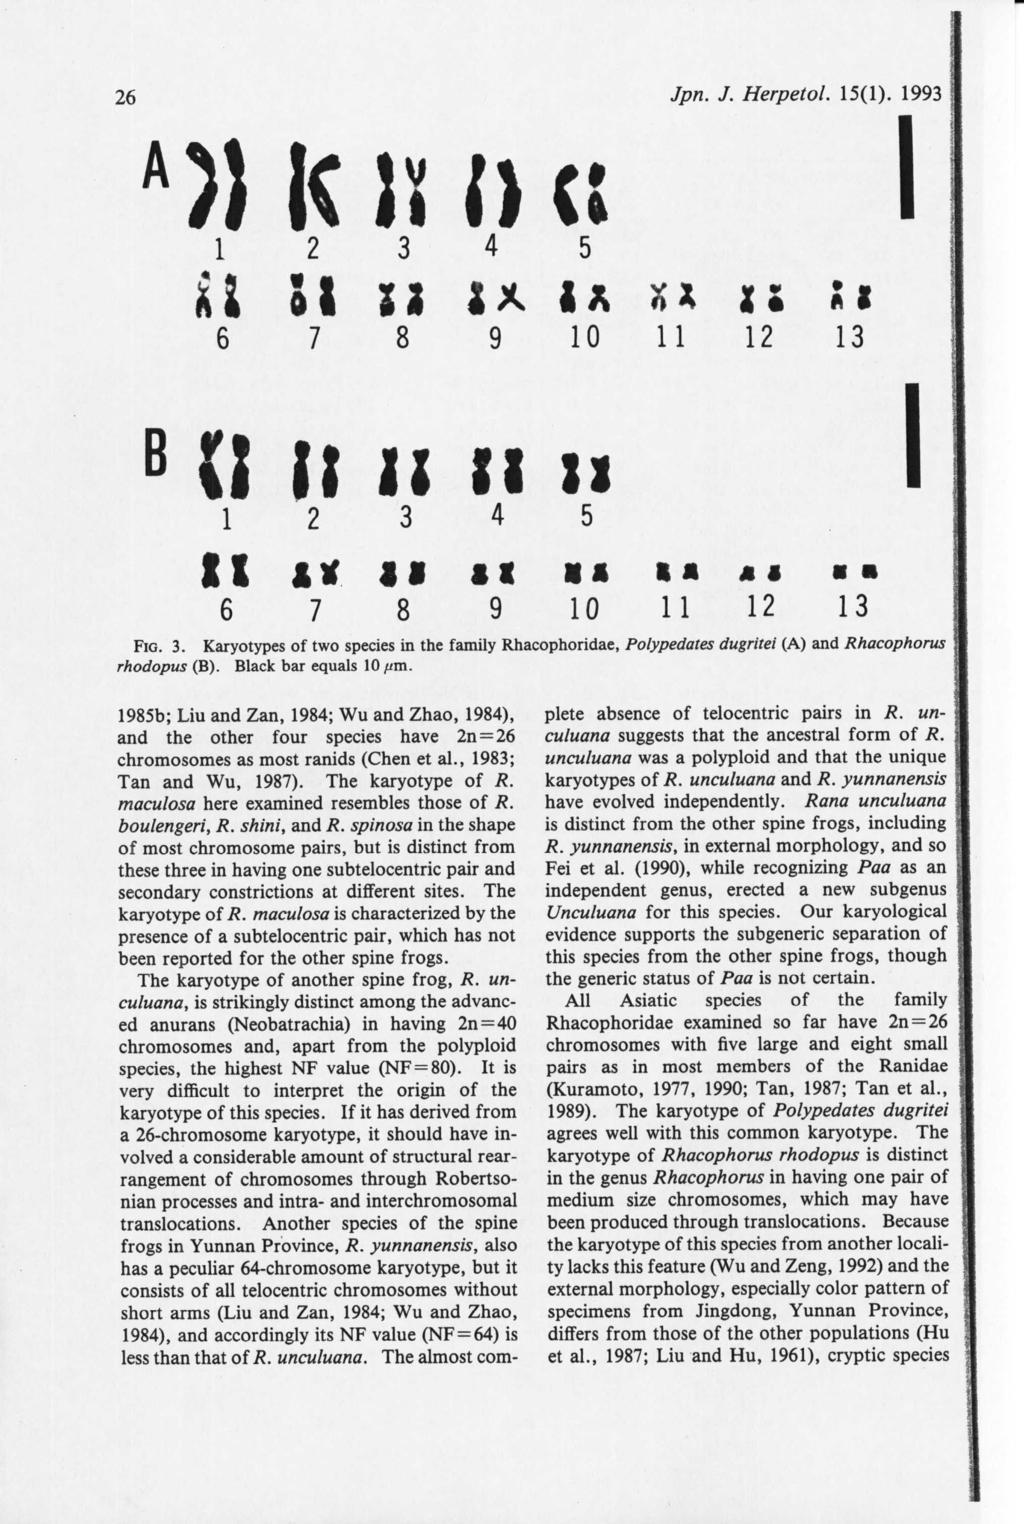 Jpn. J. Herpetol. 15(1). 1993 1985b; Liu and Zan, 1984; Wu and Zhao, 1984), and the other four species have 2n=26 chromosomes as most ranids (Chen et al., 1983; Tan and Wu, 1987). The karyotype of R.